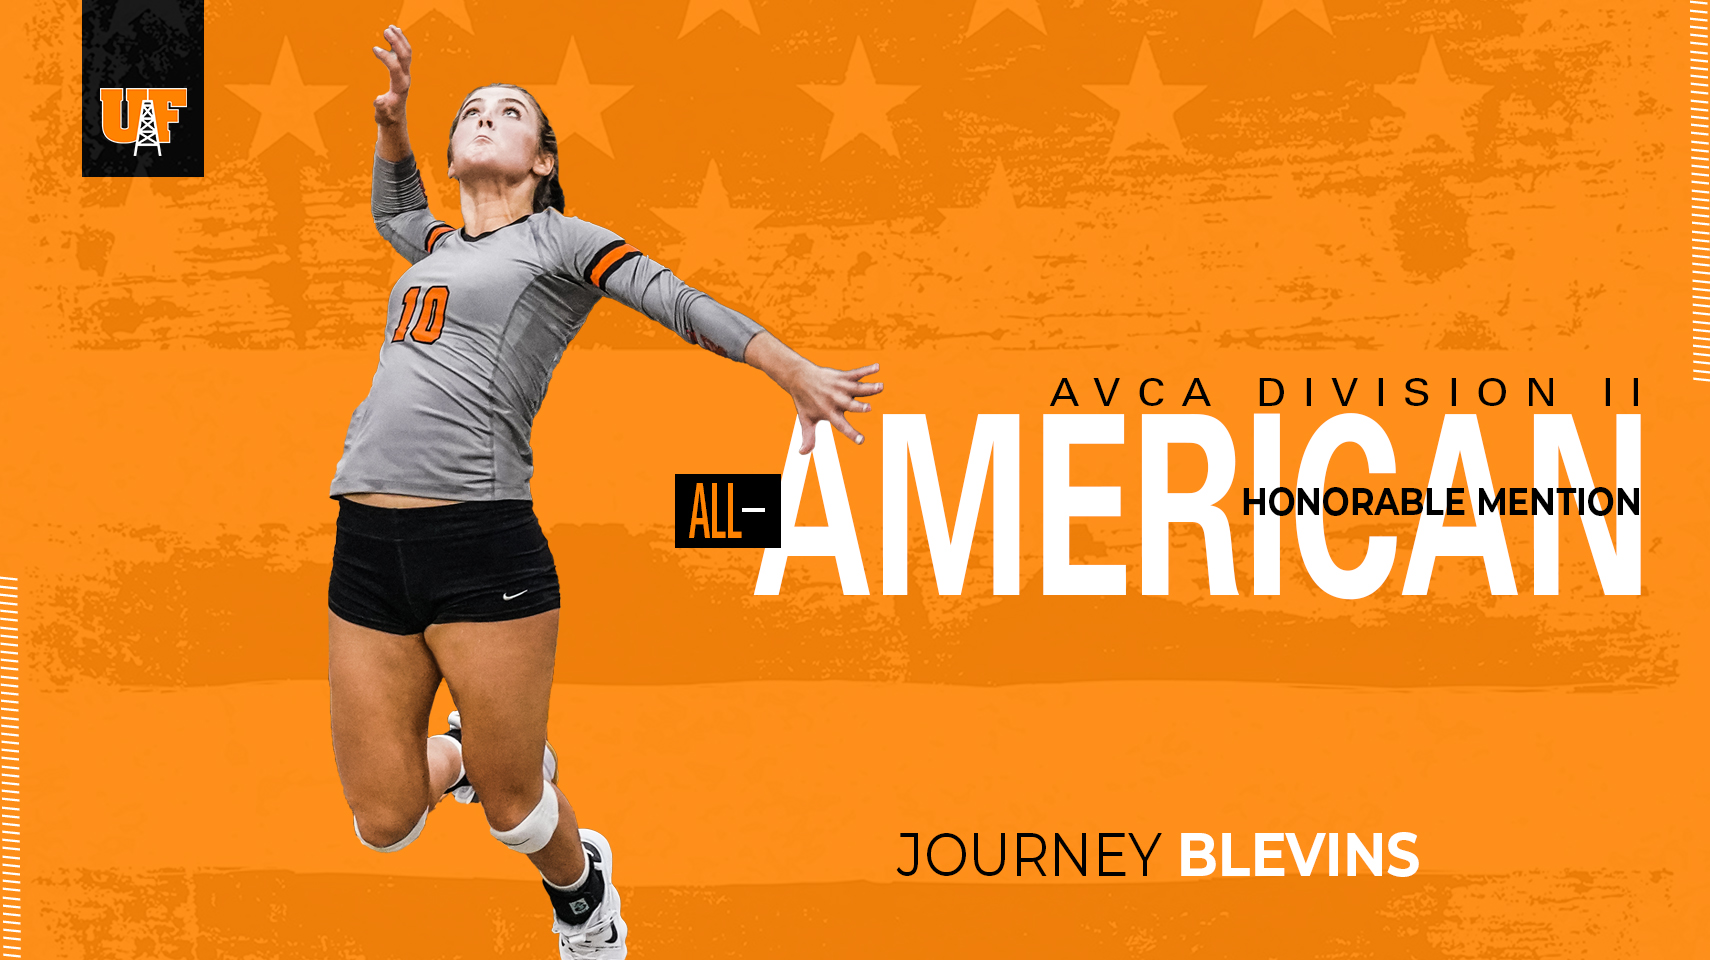 Journey Blevins Named Honorable Mention All-American by AVCA